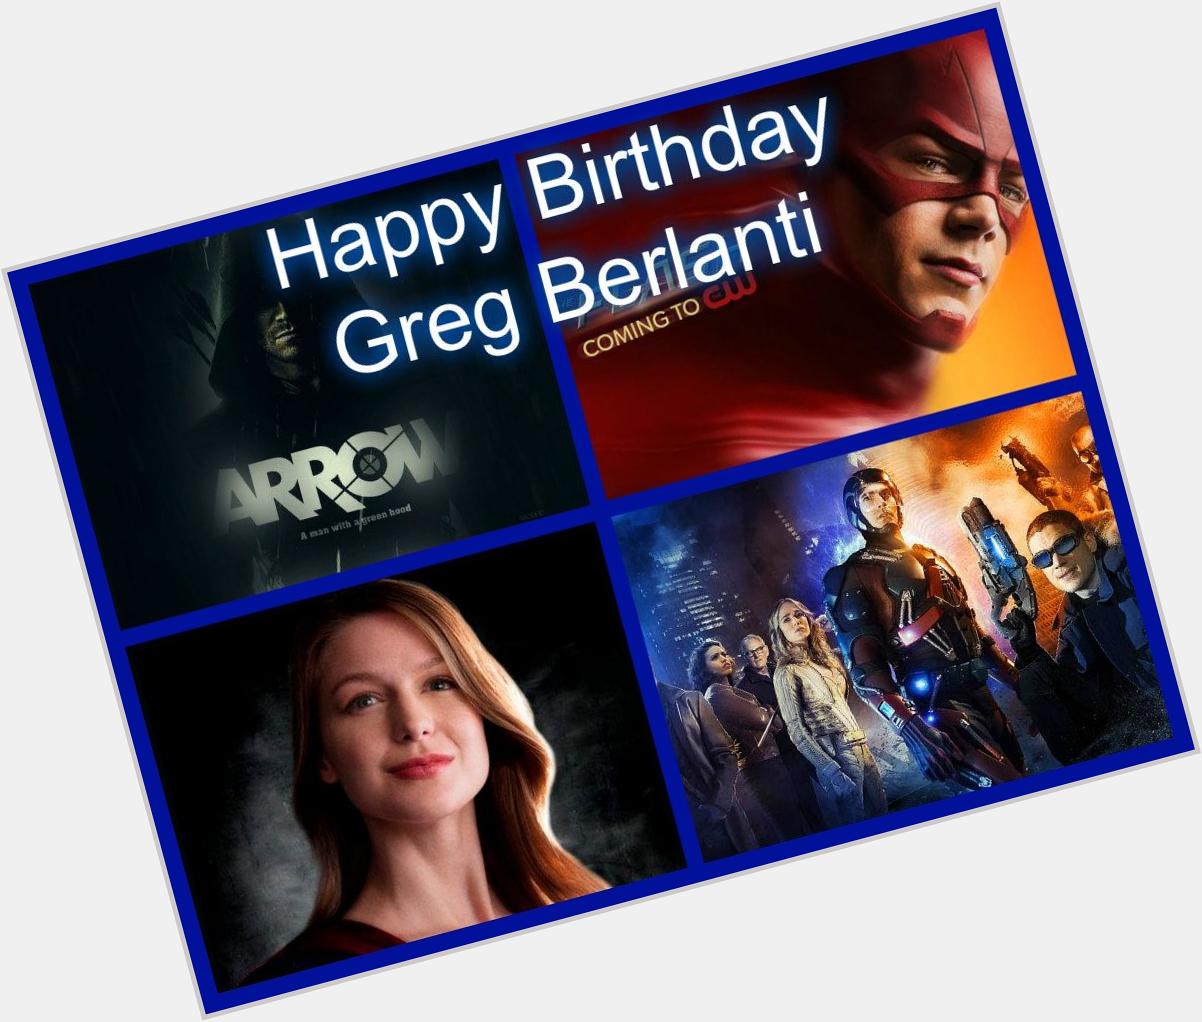  Happy Birthday Sir Greg Berlanti! I hope today was/is awesome! Please reboot Smallville with Tom Welling! 